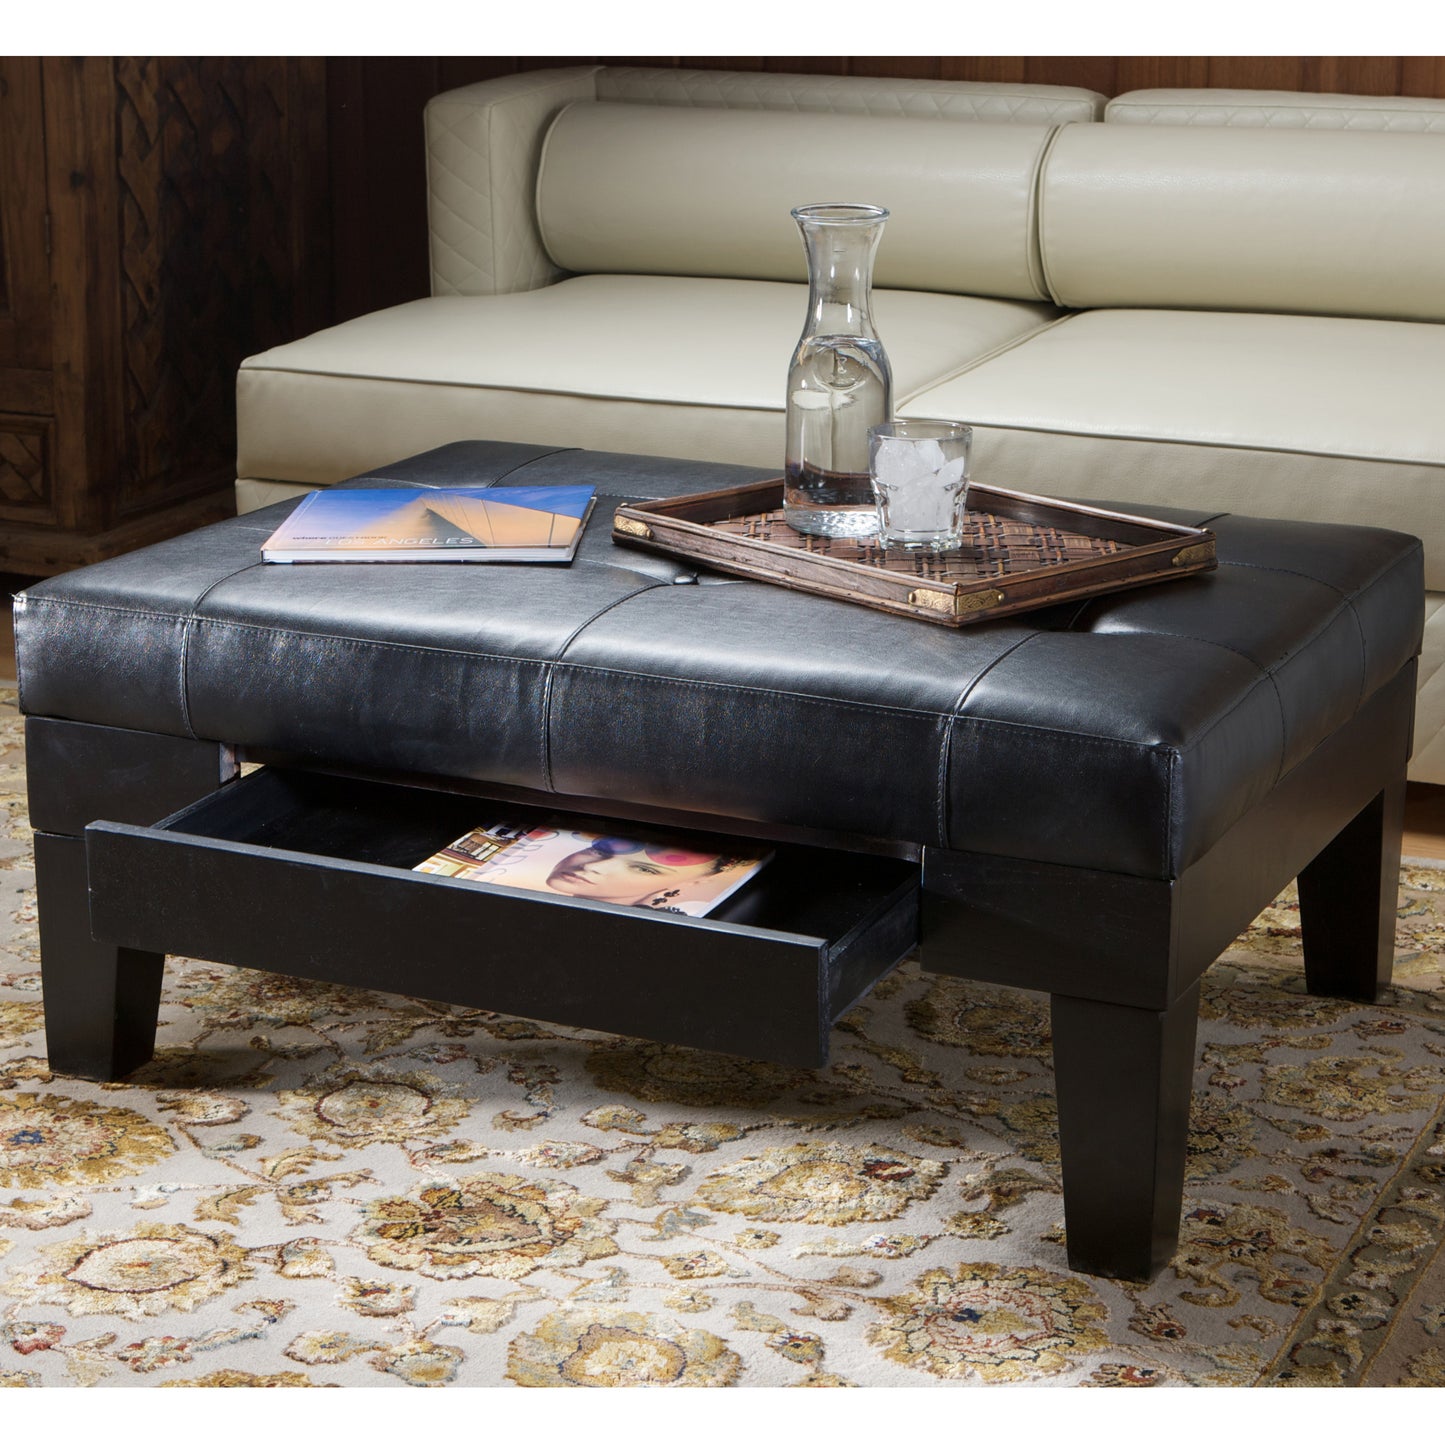 Tucson Contemporary Tufted Leather Storage Ottoman Table with Drawer